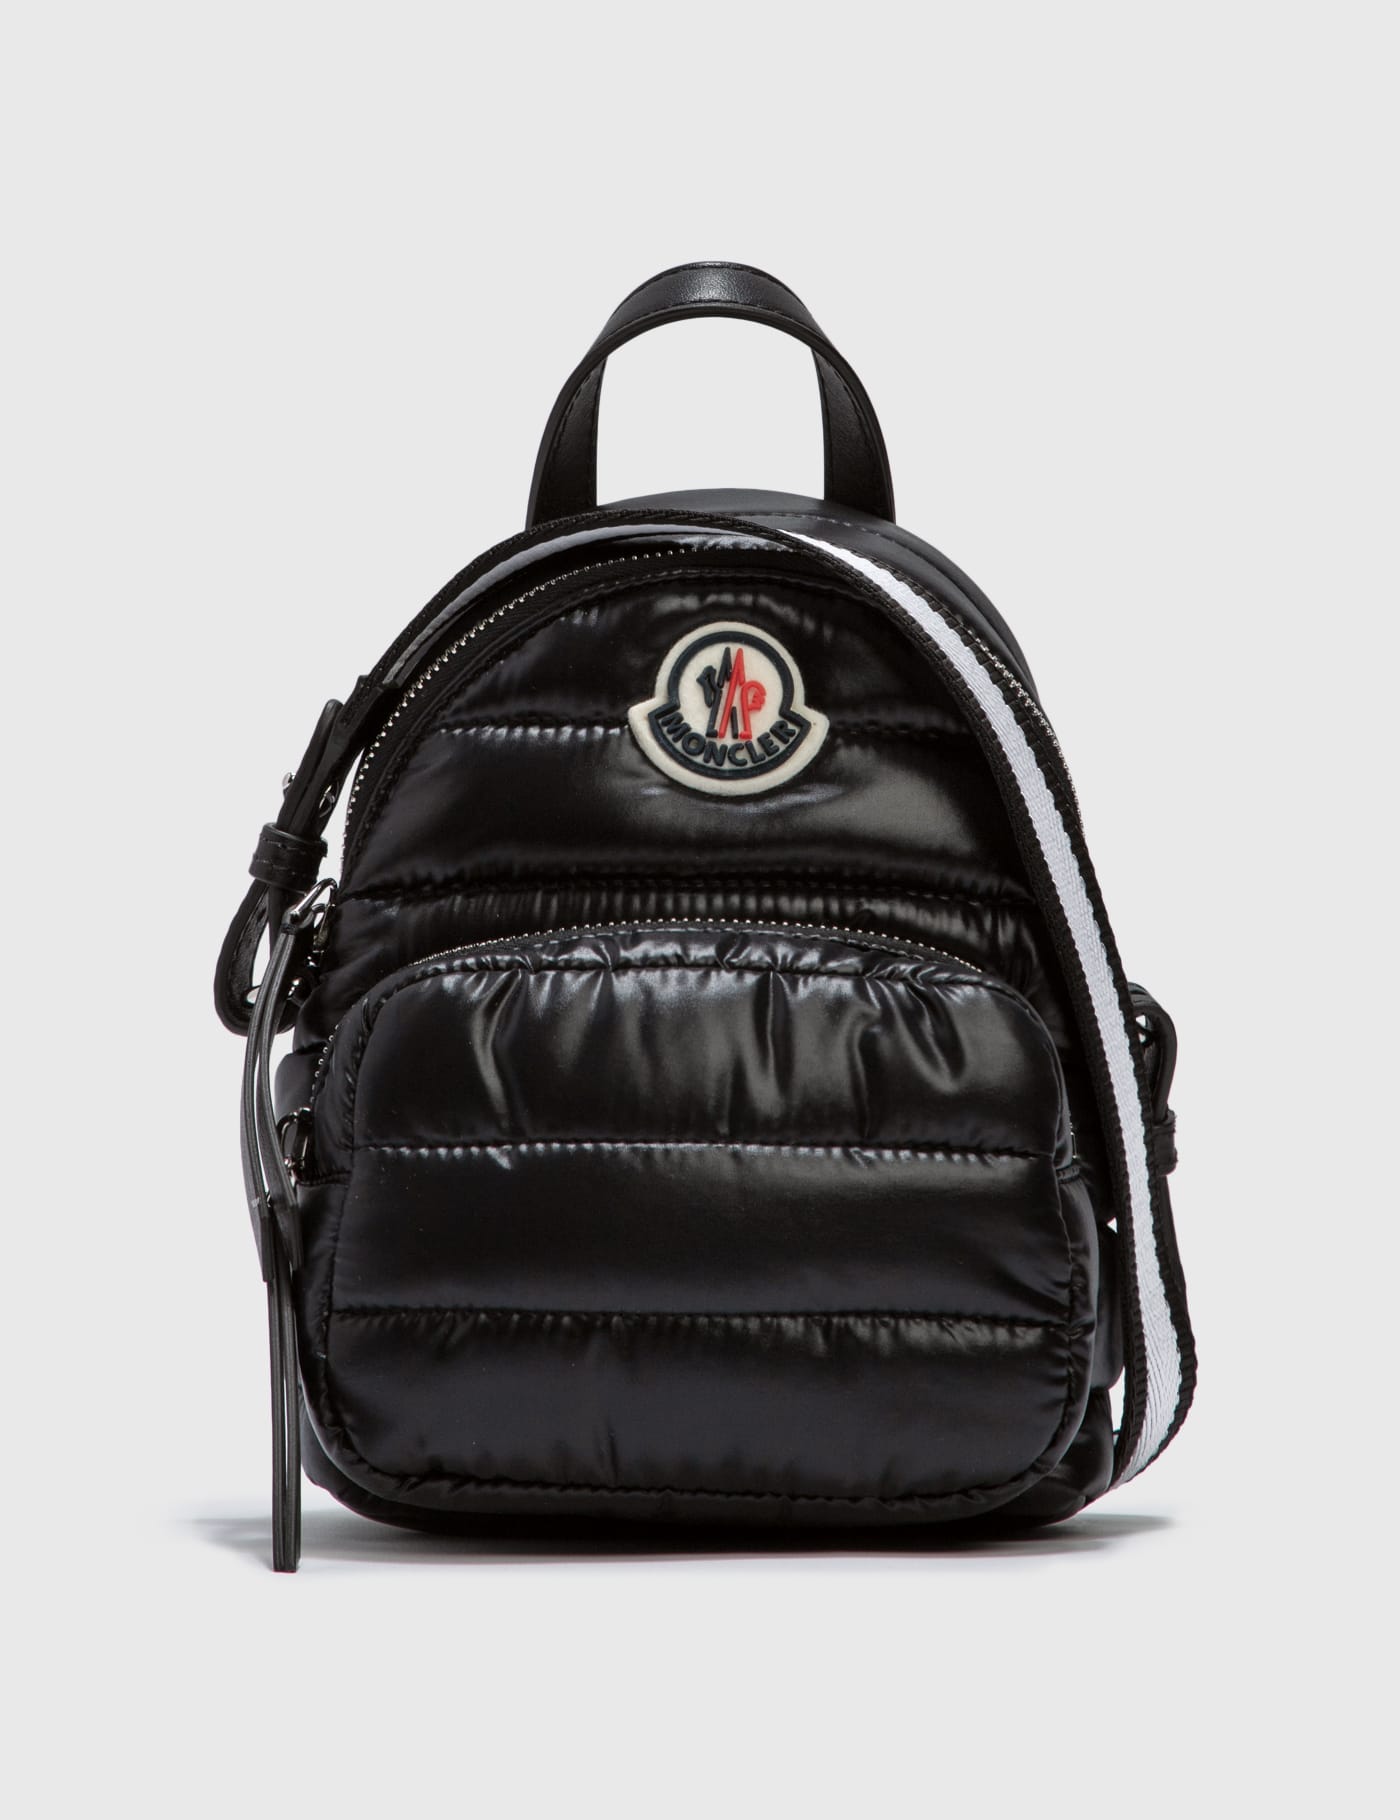 Moncler - Kilia Small Backpack | HBX - Globally Curated Fashion 